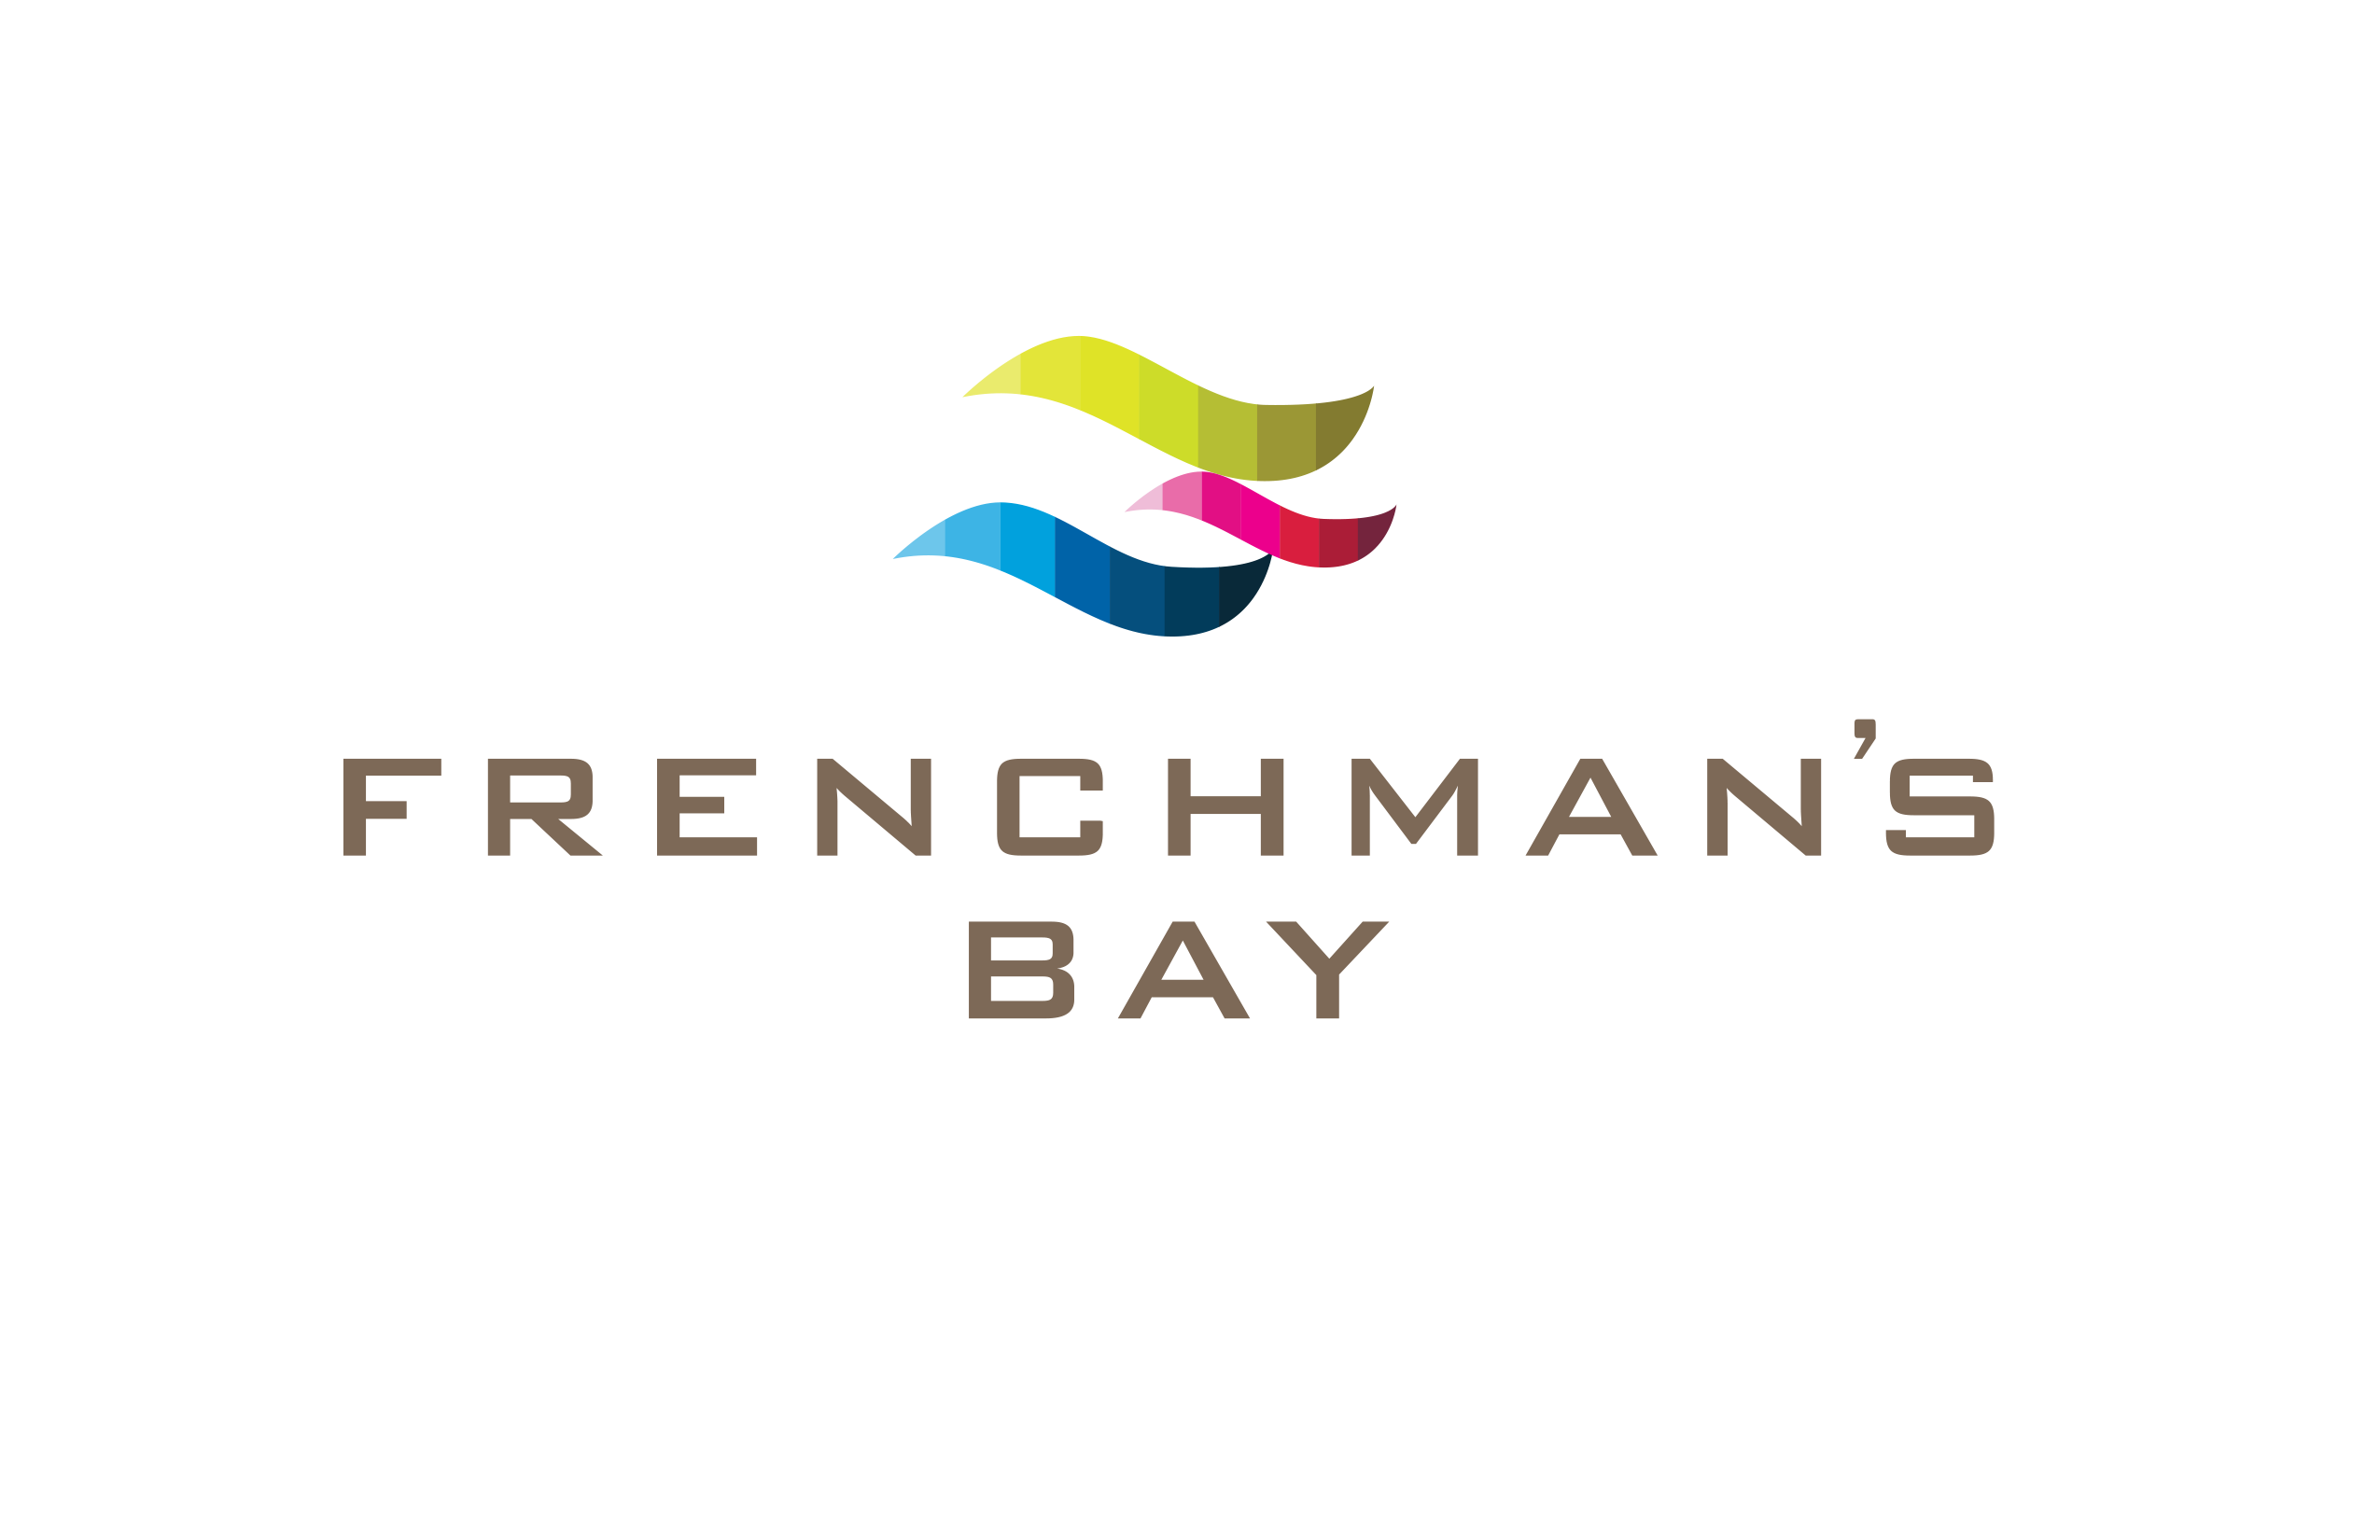 Low Rise, Madison Homes, Frenchman's Bay, Logo